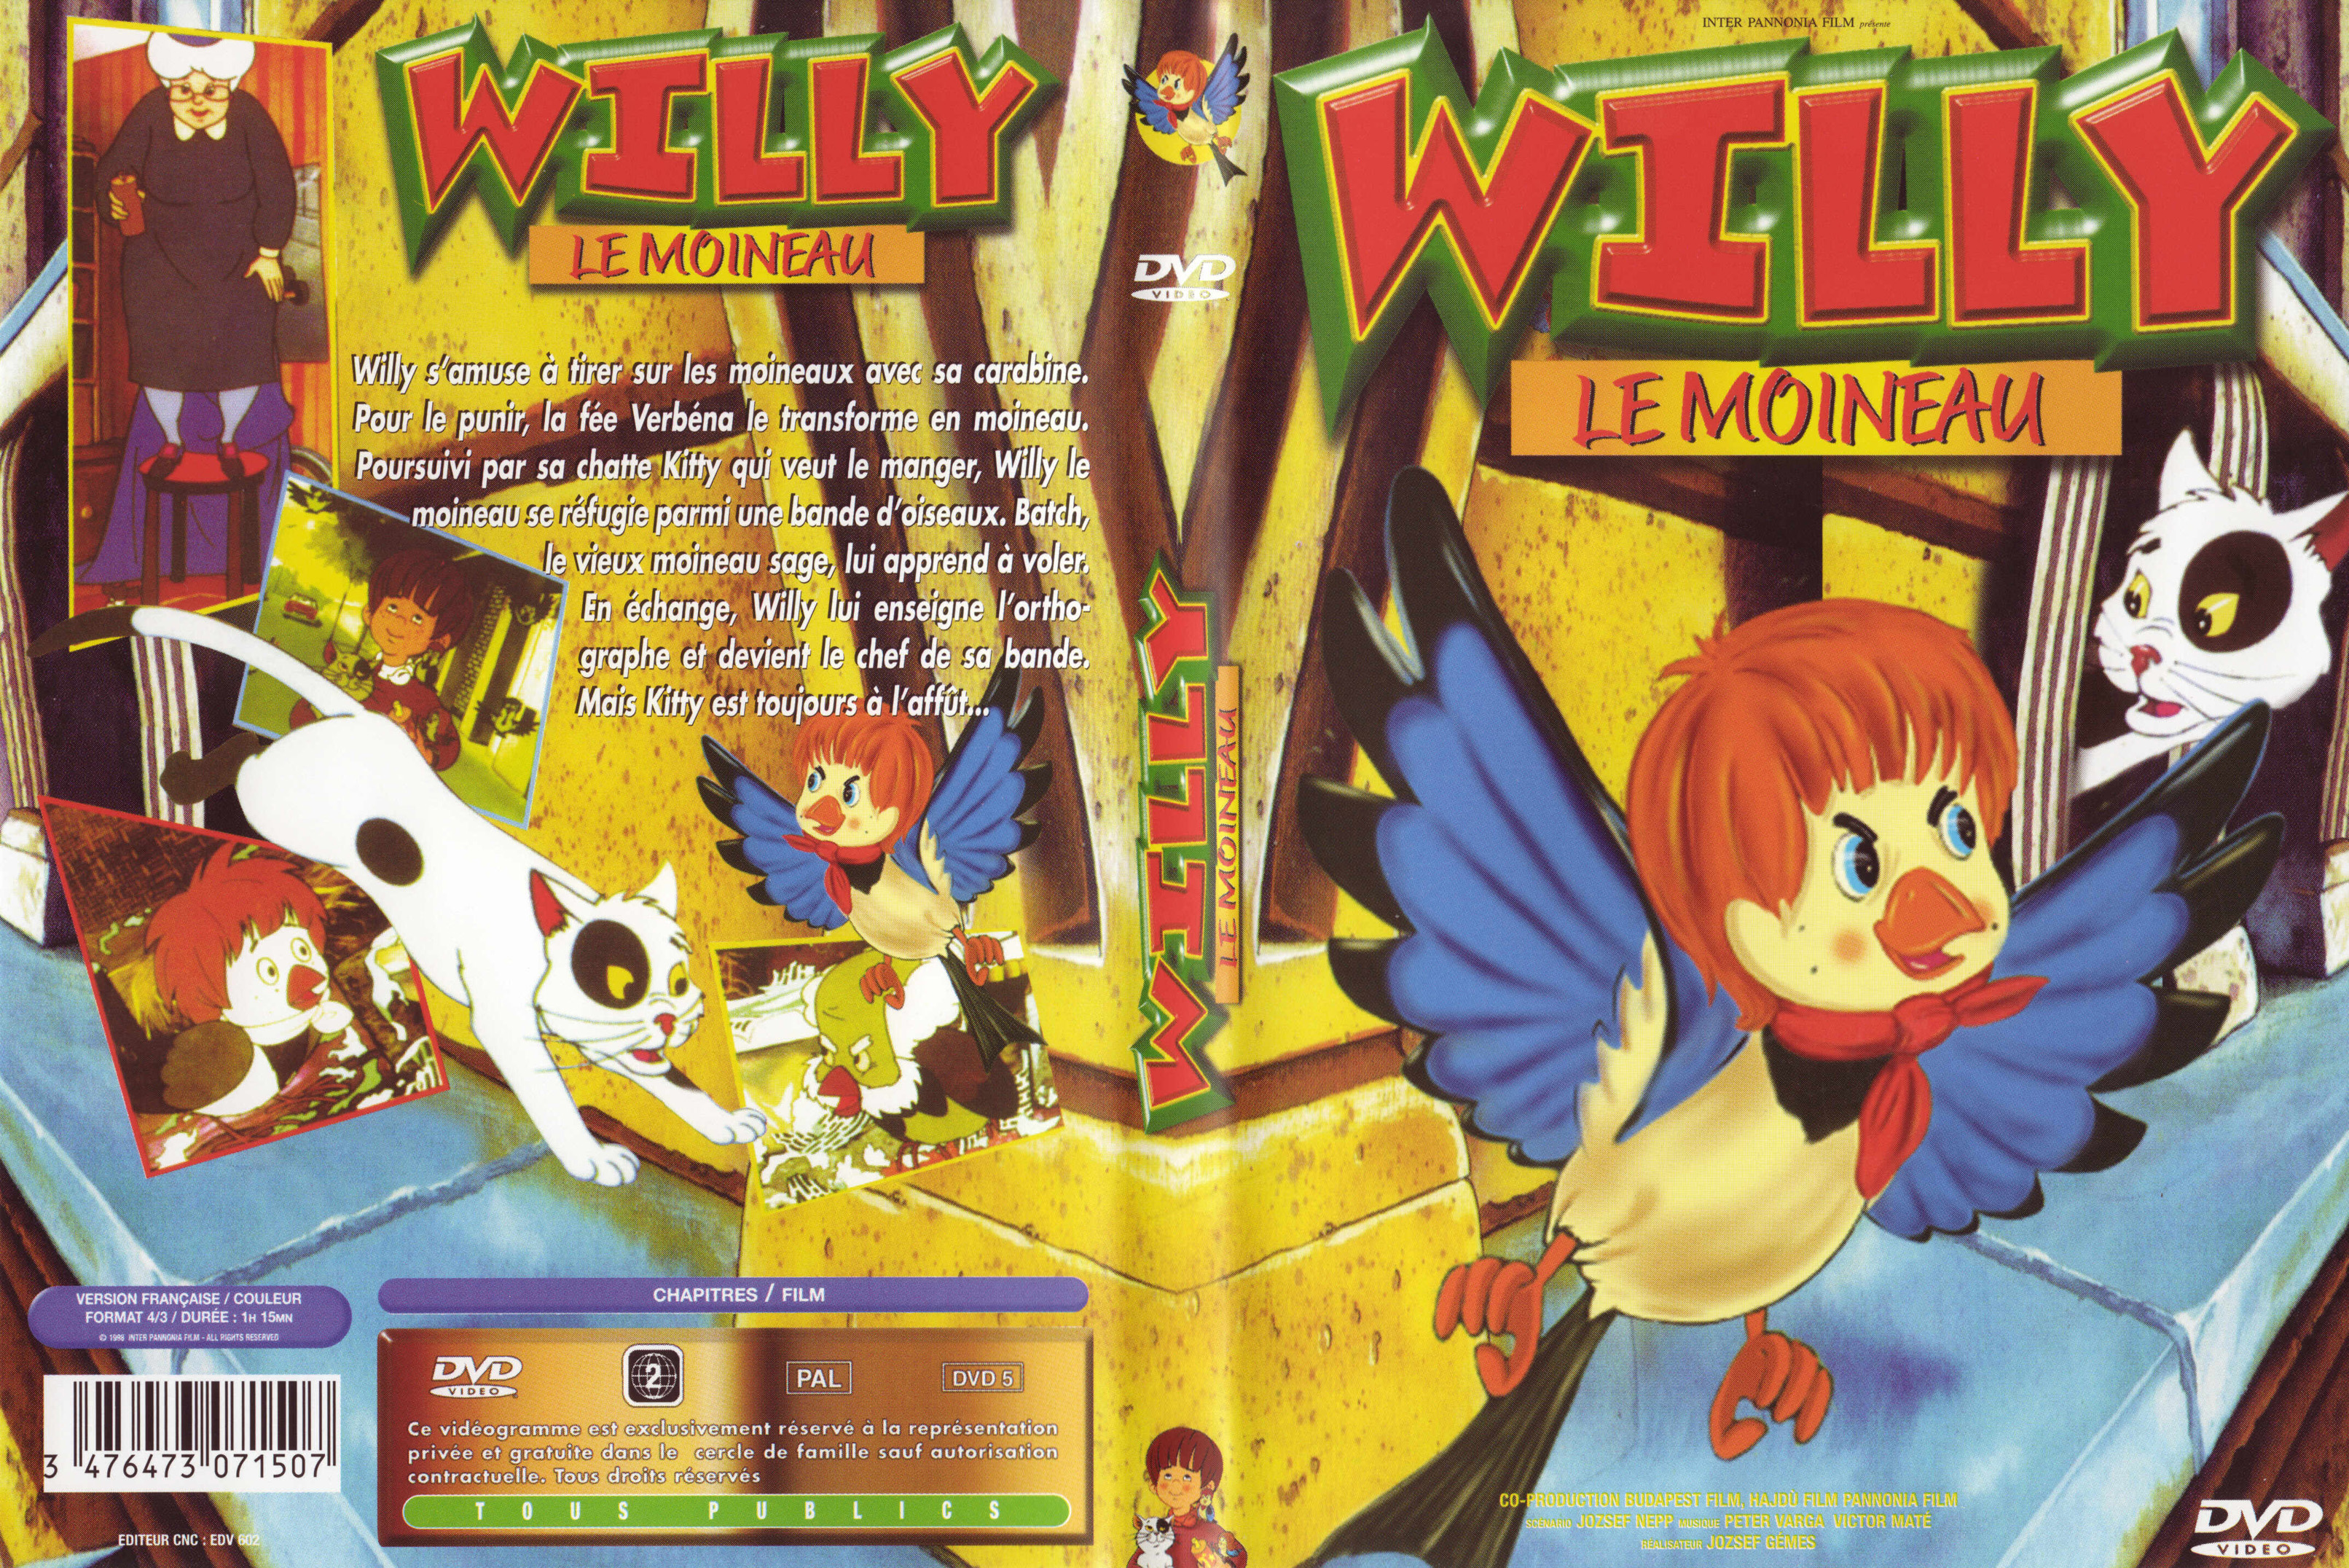 Jaquette DVD Willy le moineau